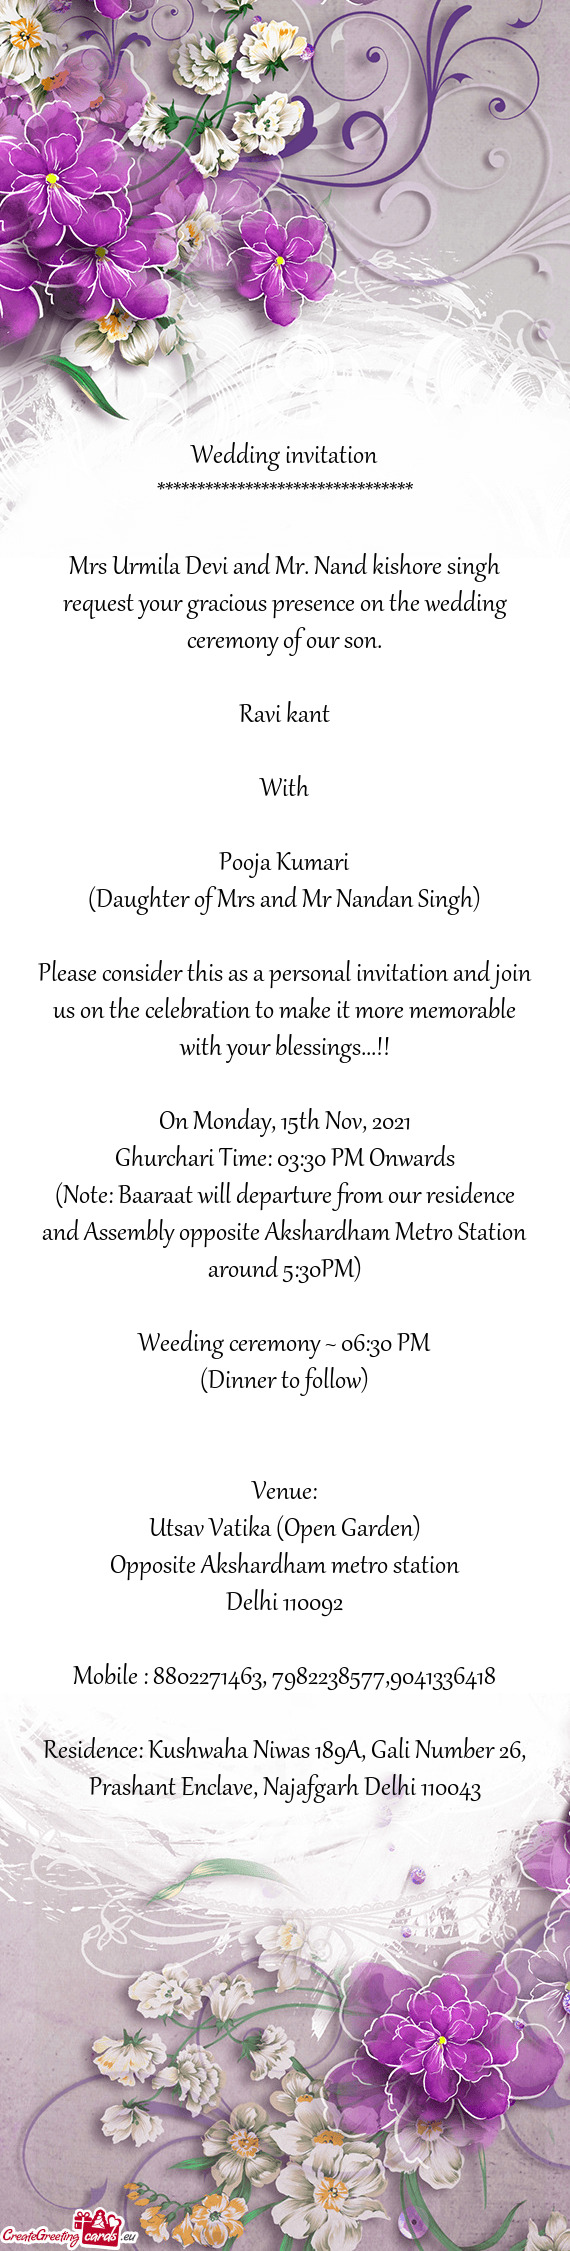 Mrs Urmila Devi and Mr. Nand kishore singh request your gracious presence on the wedding ceremony of